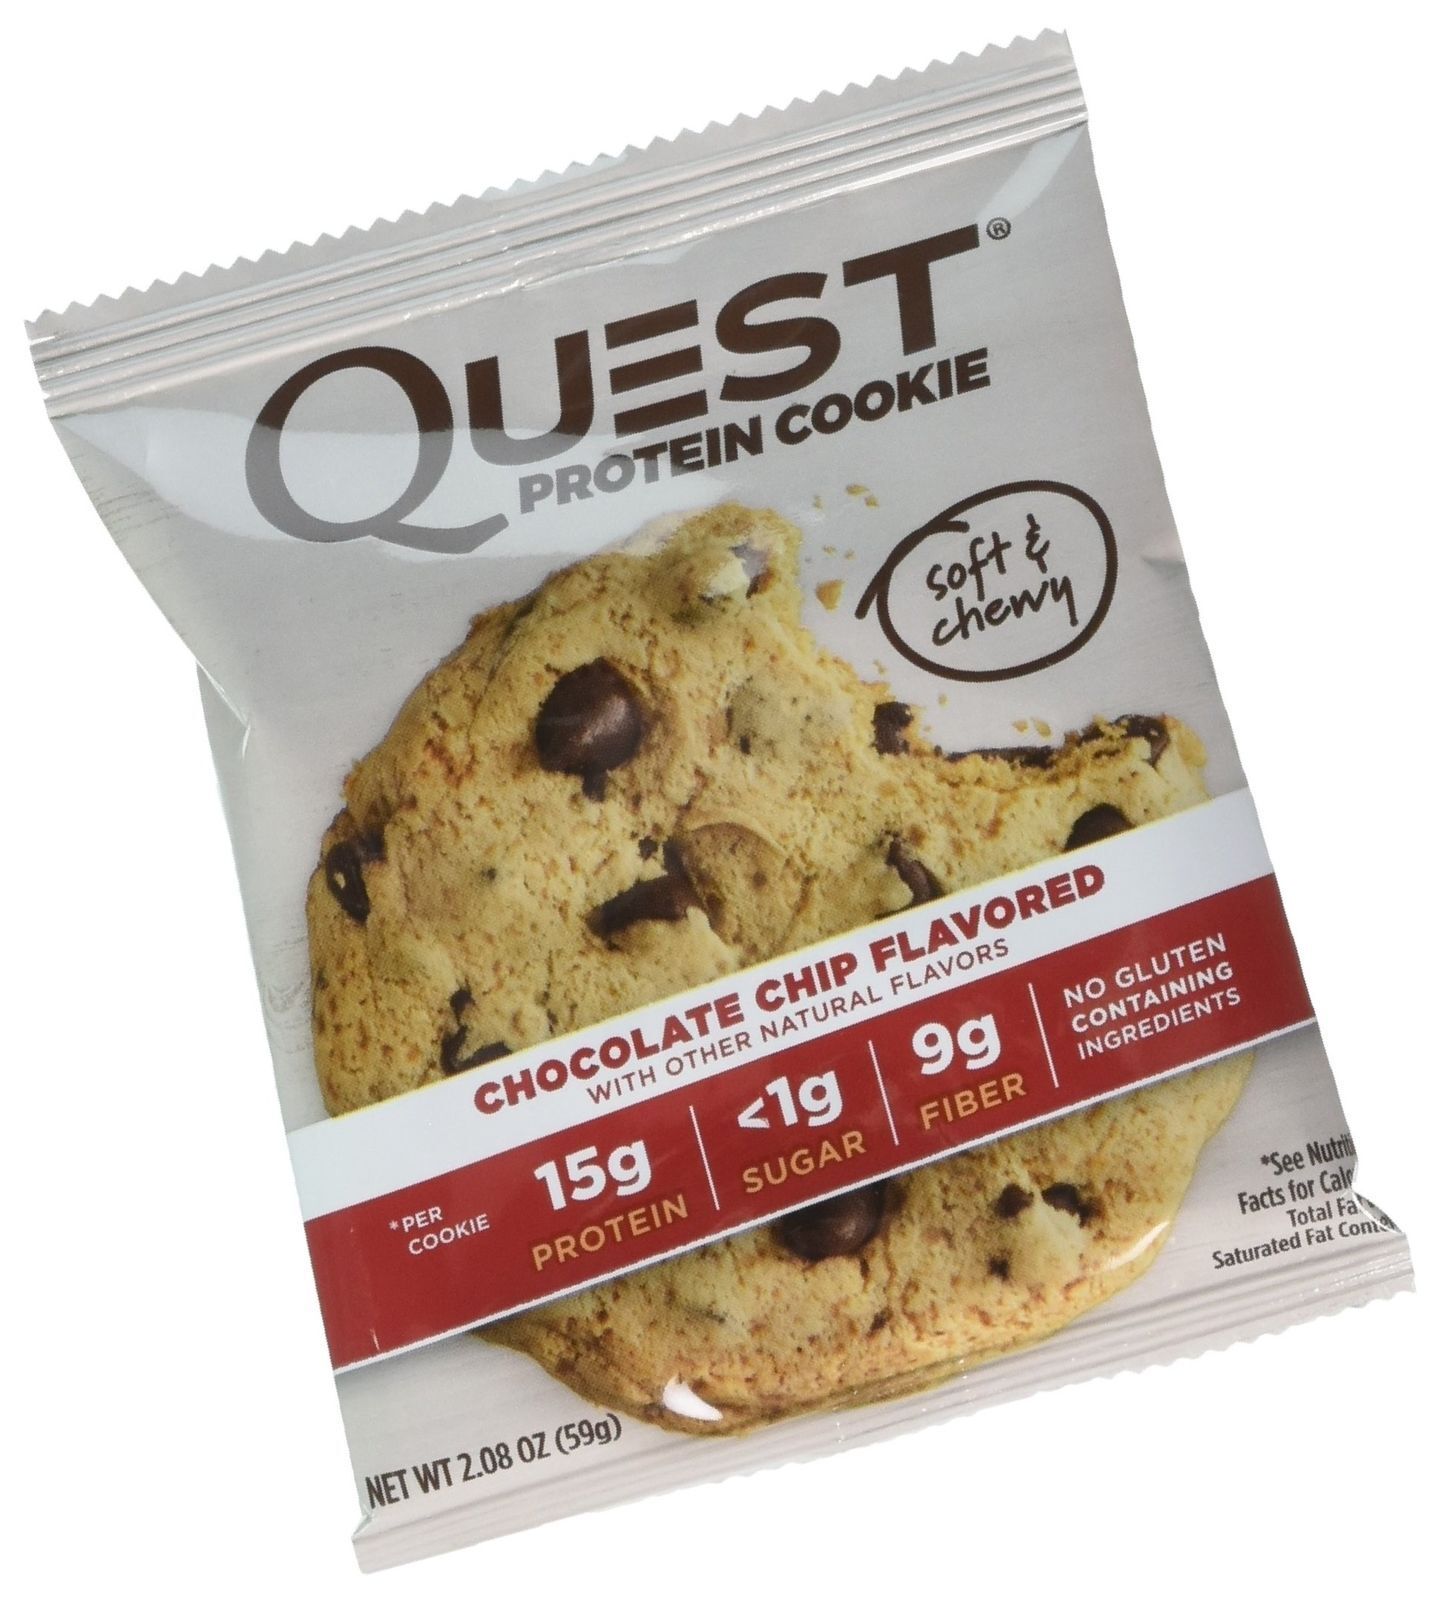 24 Count - Quest Protein Cookie, Chocolate Chip, 15g Protein, 4g Net Carbs 